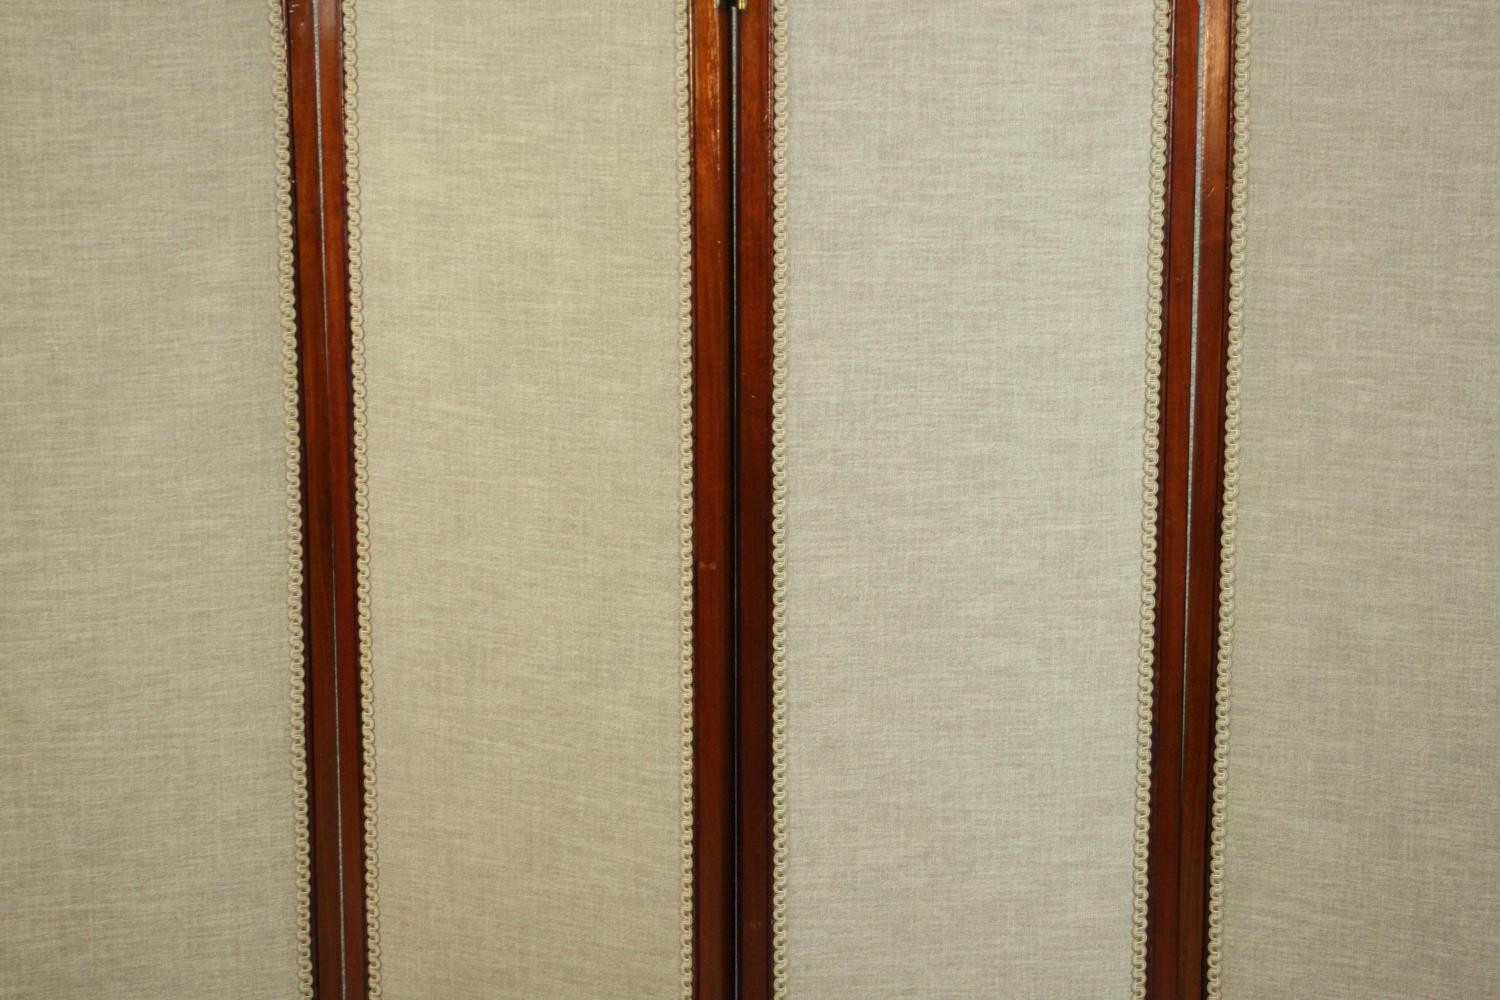 An Edwardian walnut fourfold screen, each panel upholstered with an oatmeal coloured fabric, with - Image 4 of 10